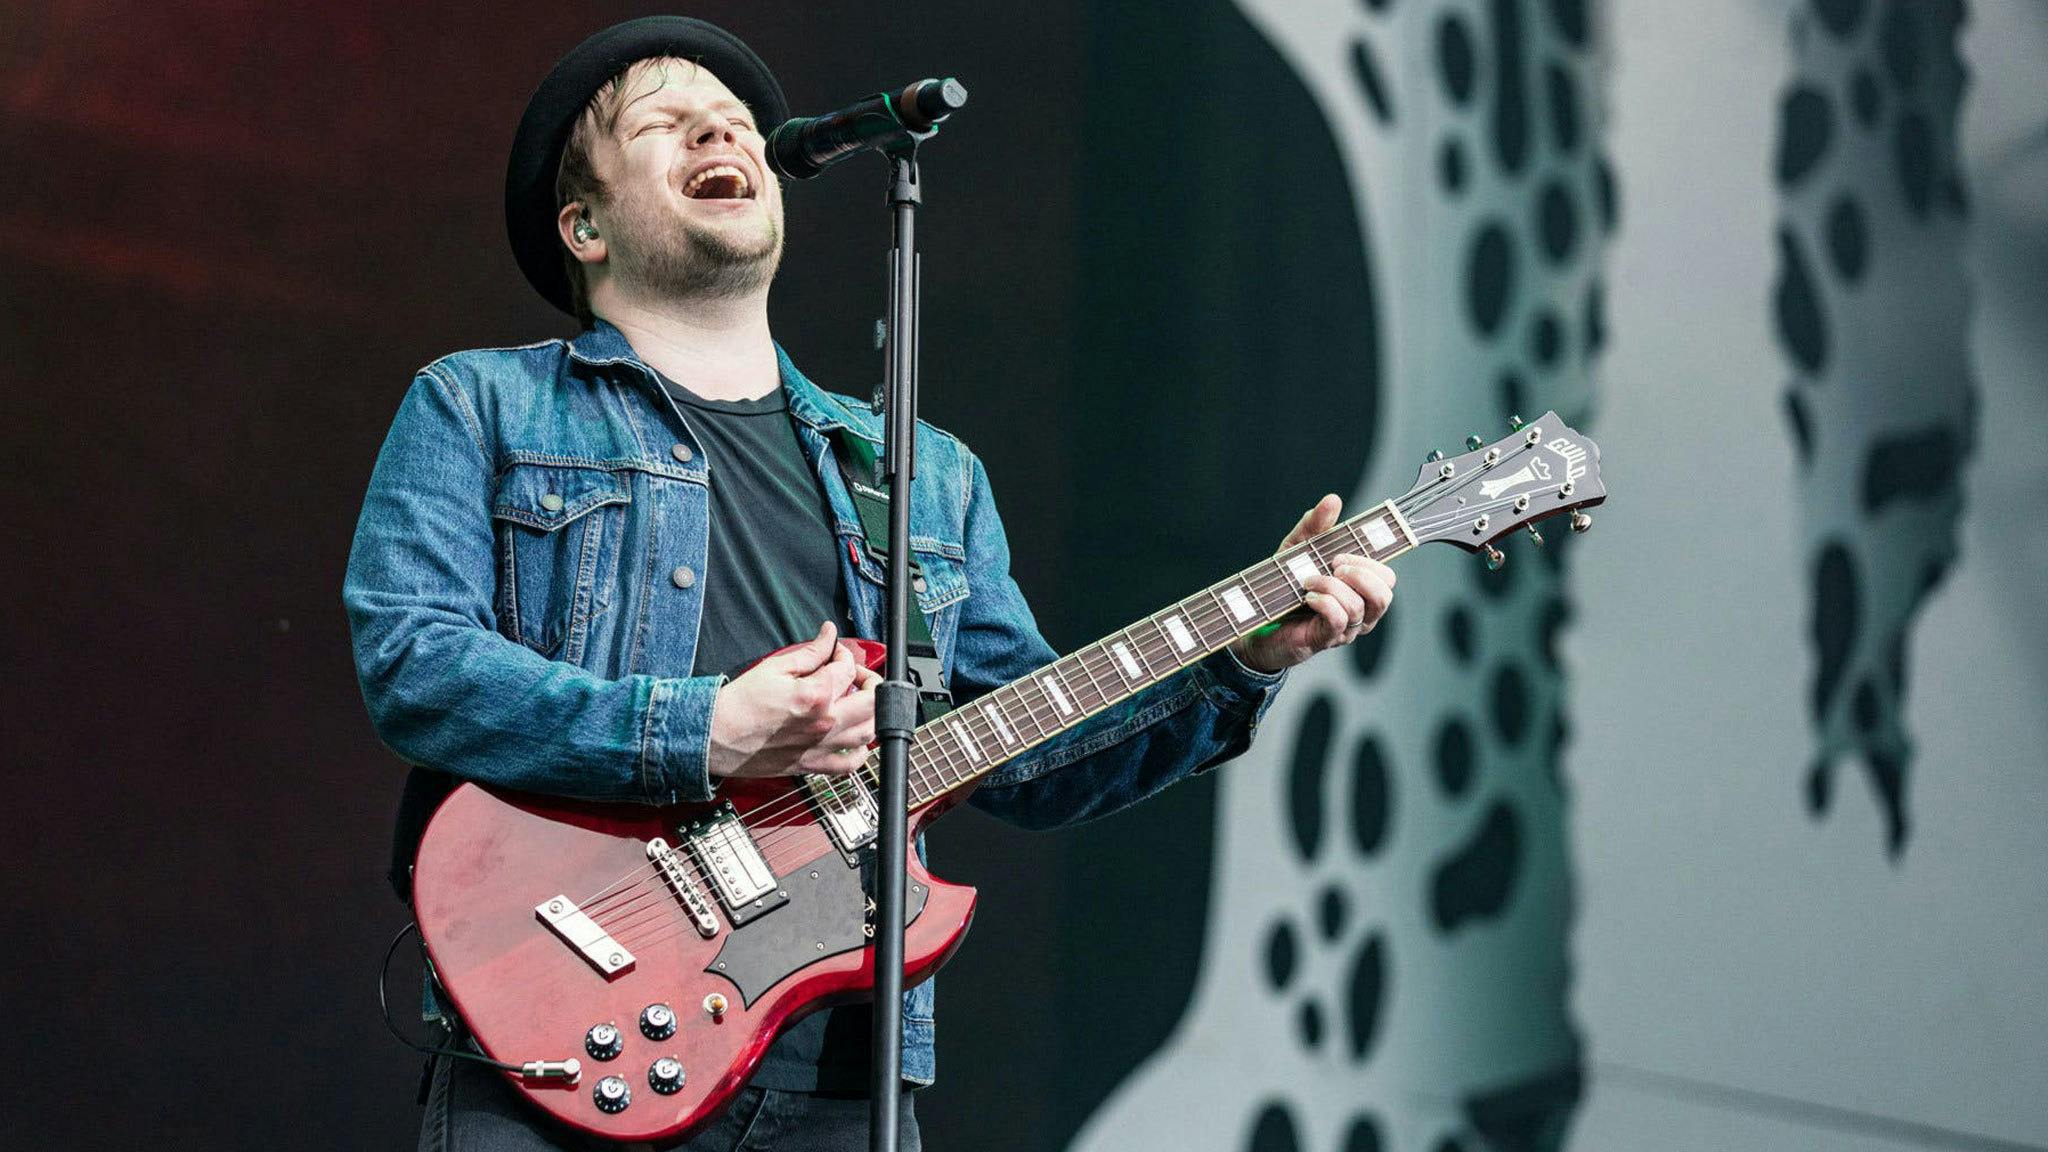 Fall Out Boy to perform Hold Me Like A Grudge on Jimmy Fallon